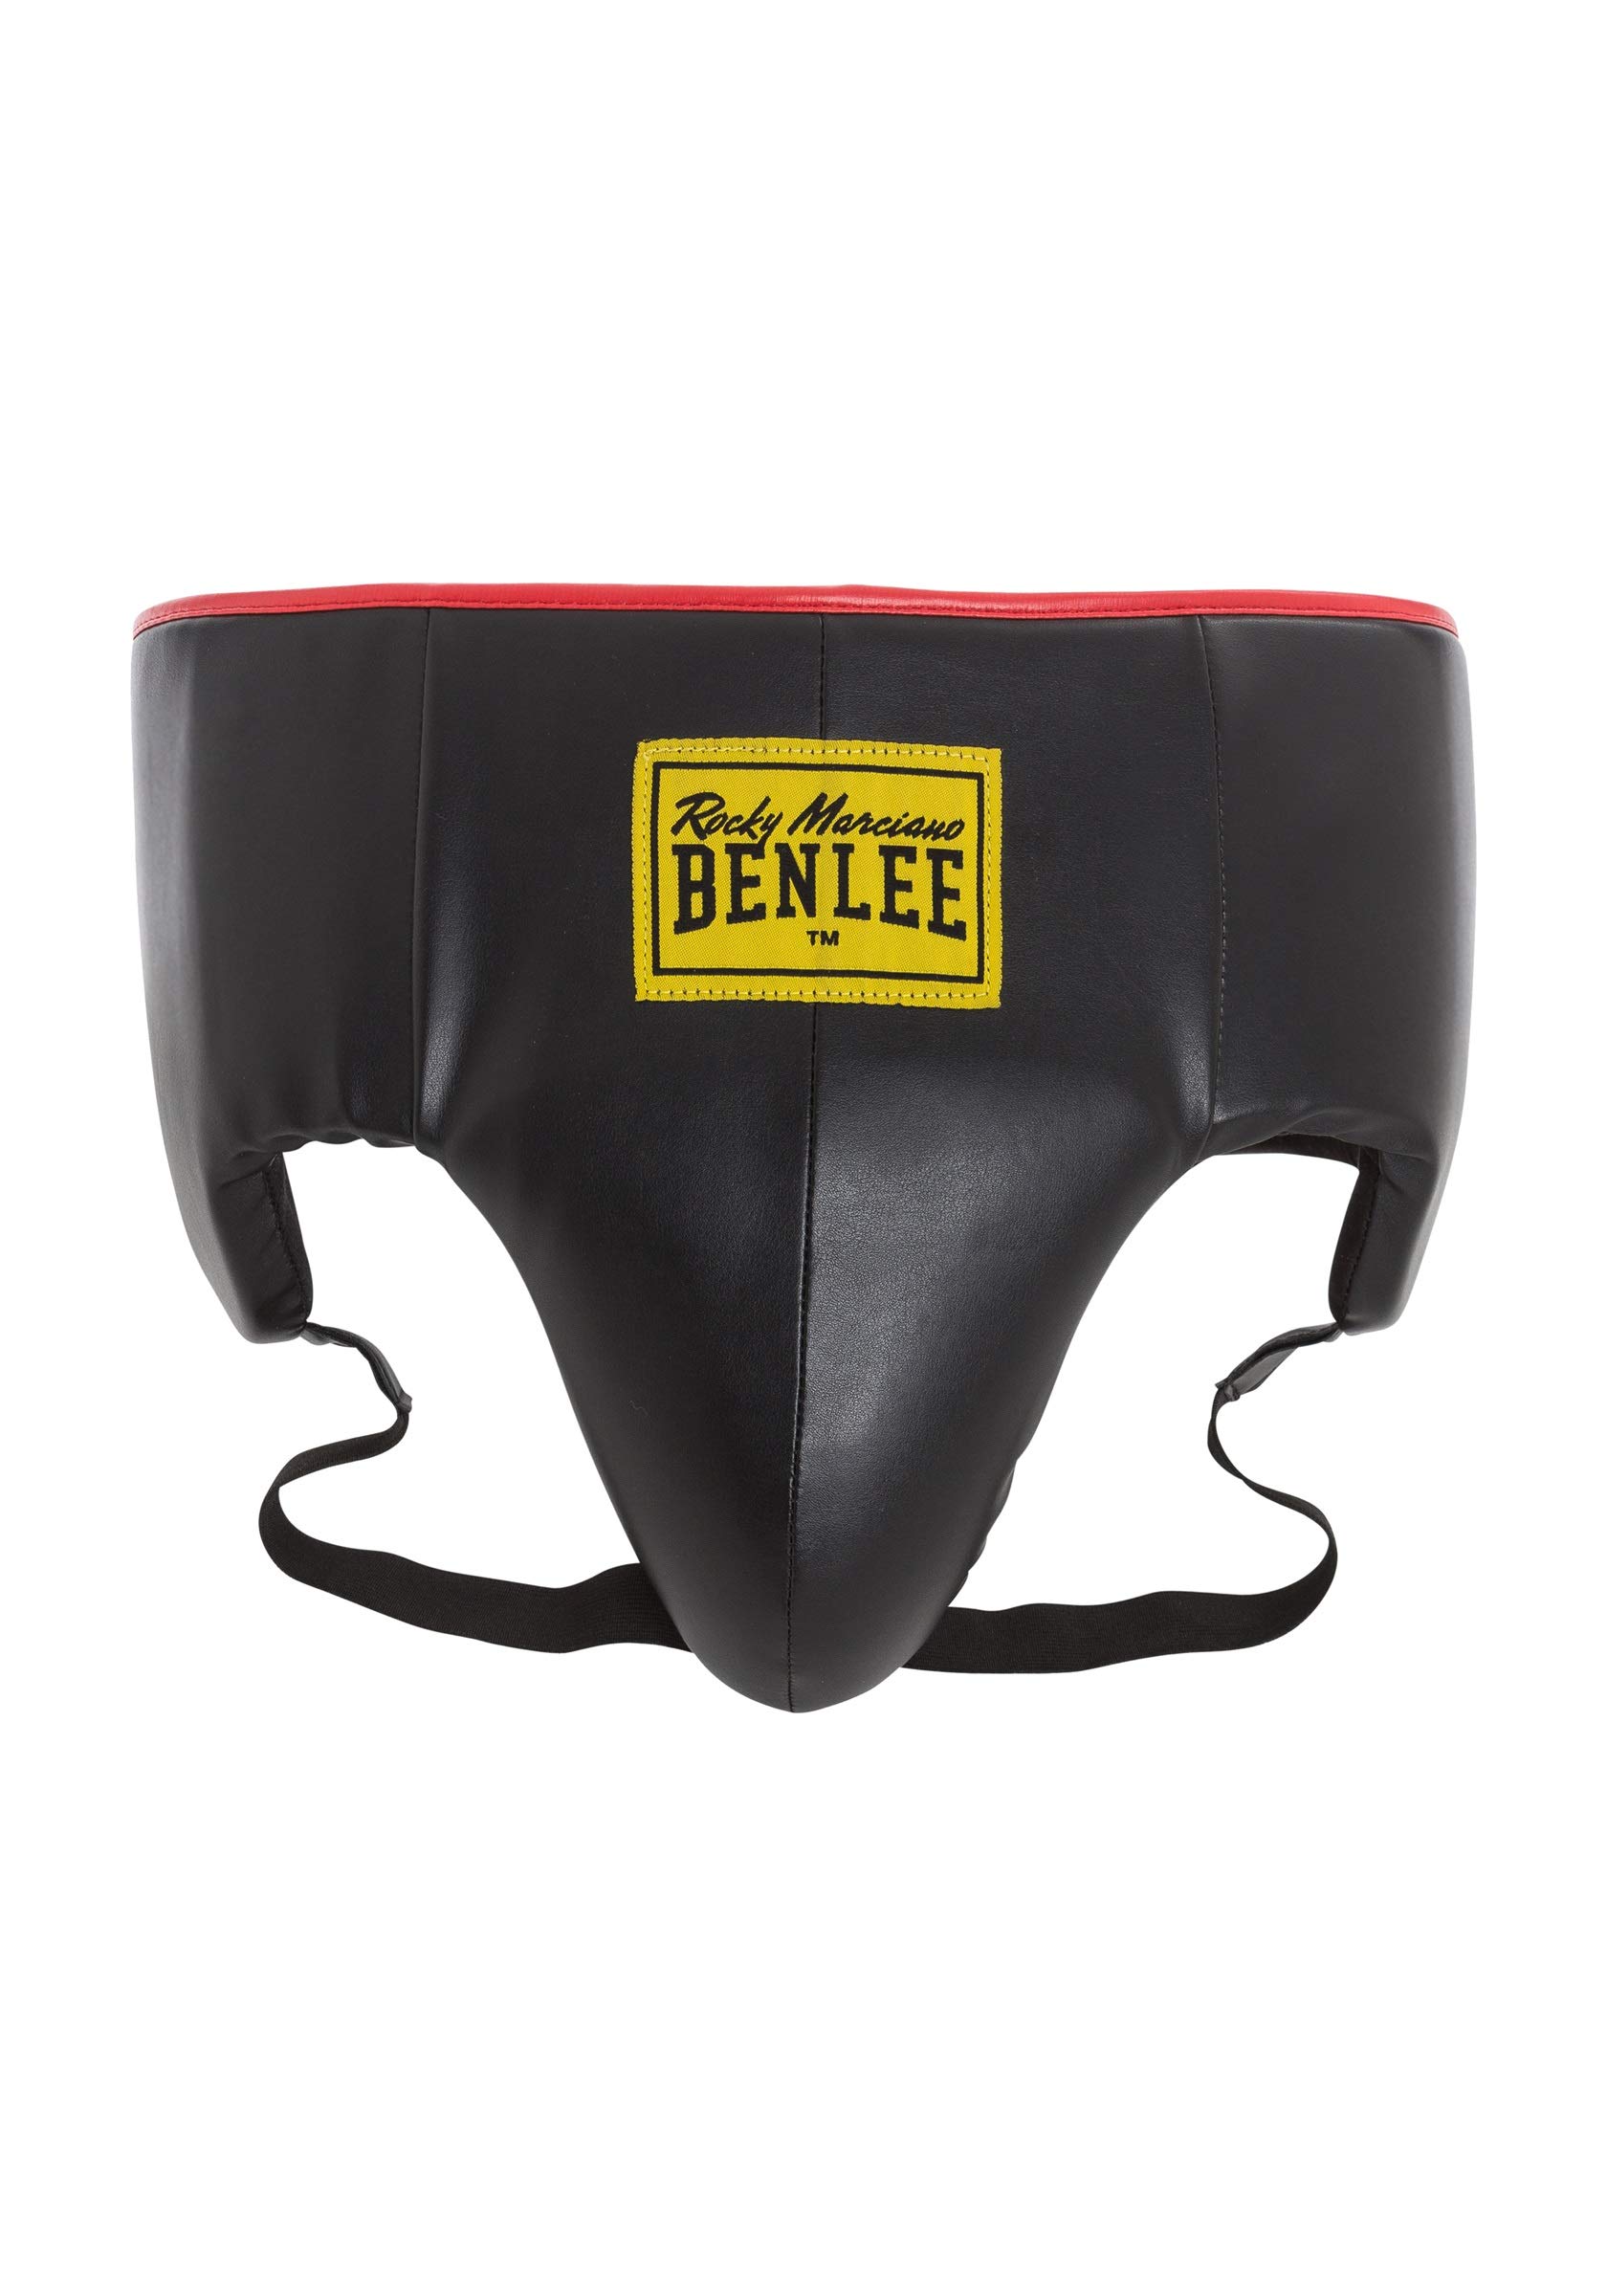 Benlee Rocky Marciano Unisex – Erwachsene Lucca Artificial Leather Groinguard, Black, L